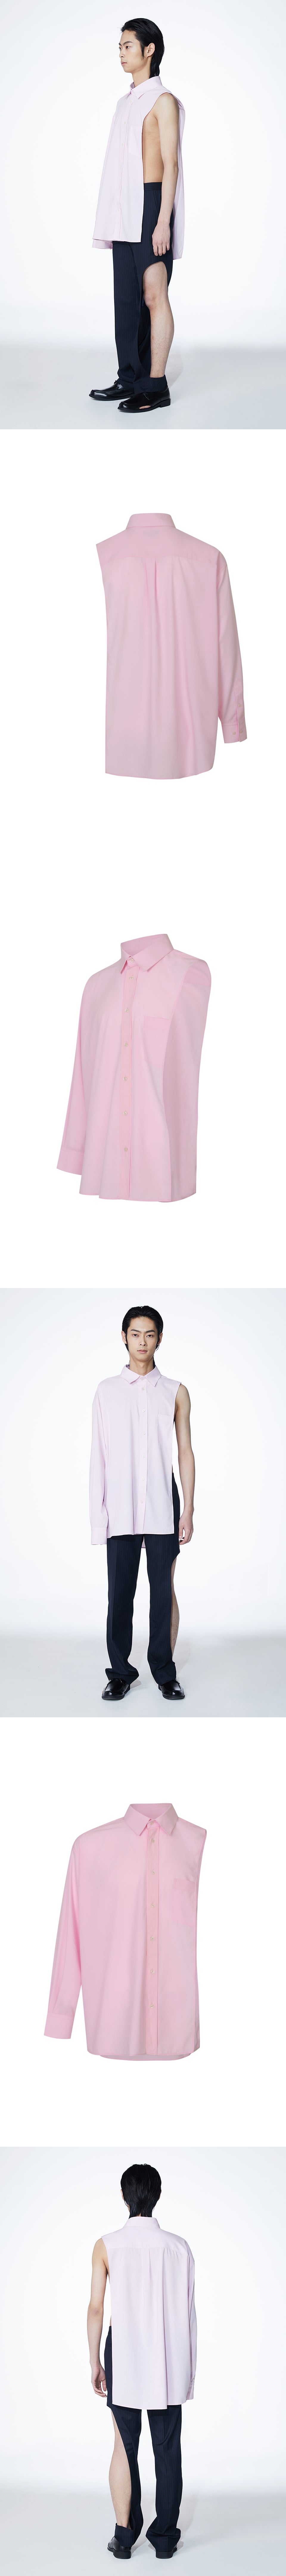 JIMINLEE 1/3 Cut-Out shirts PINK